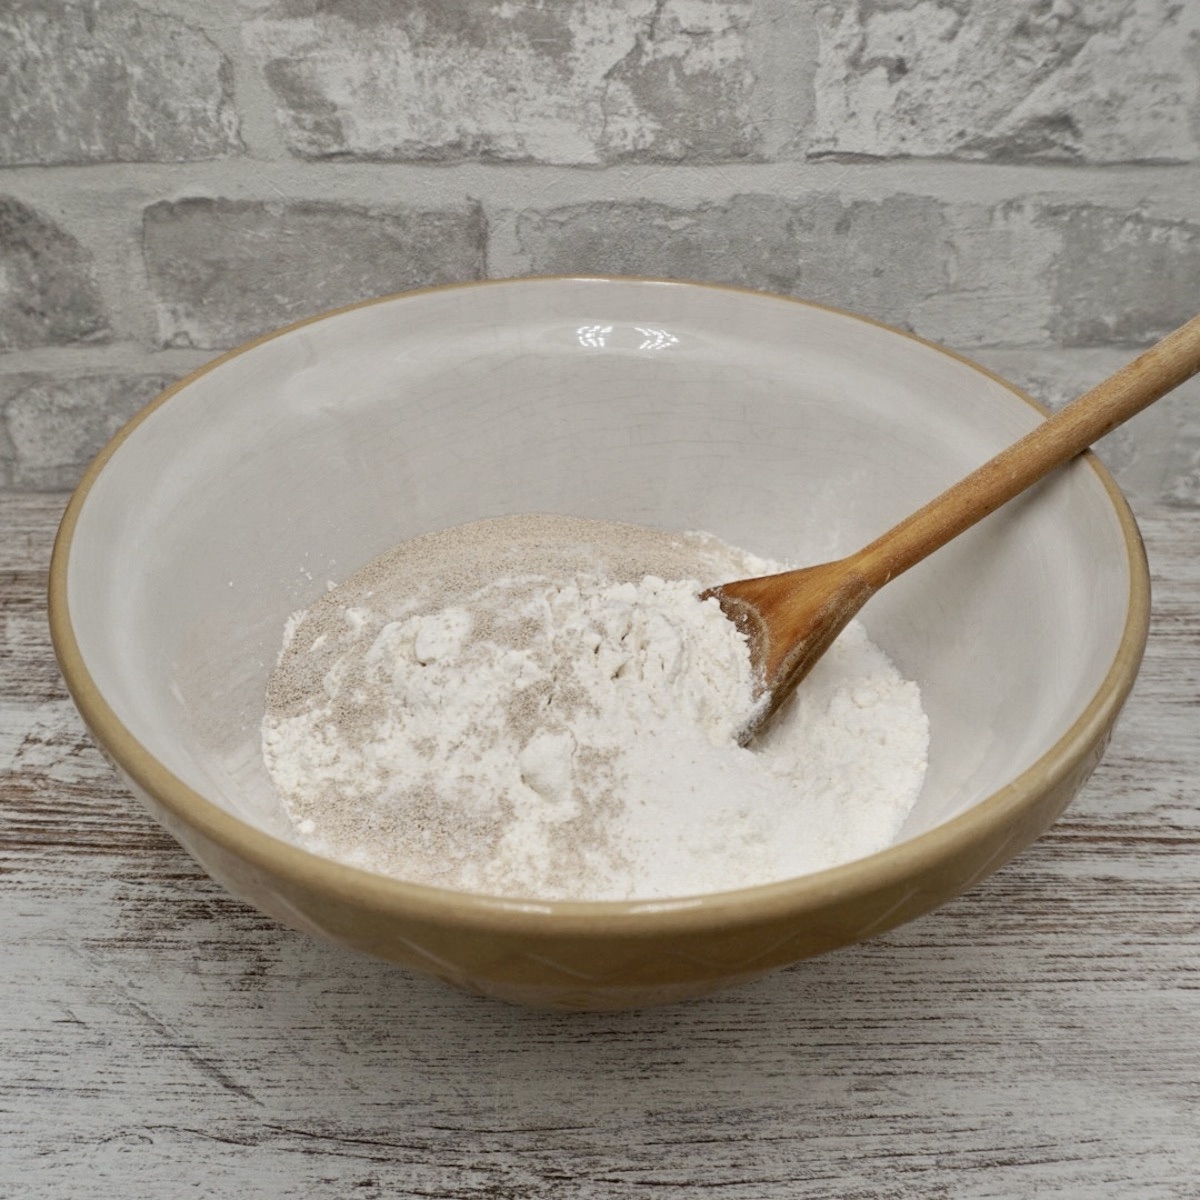 Bread dough ingredients in a bowl